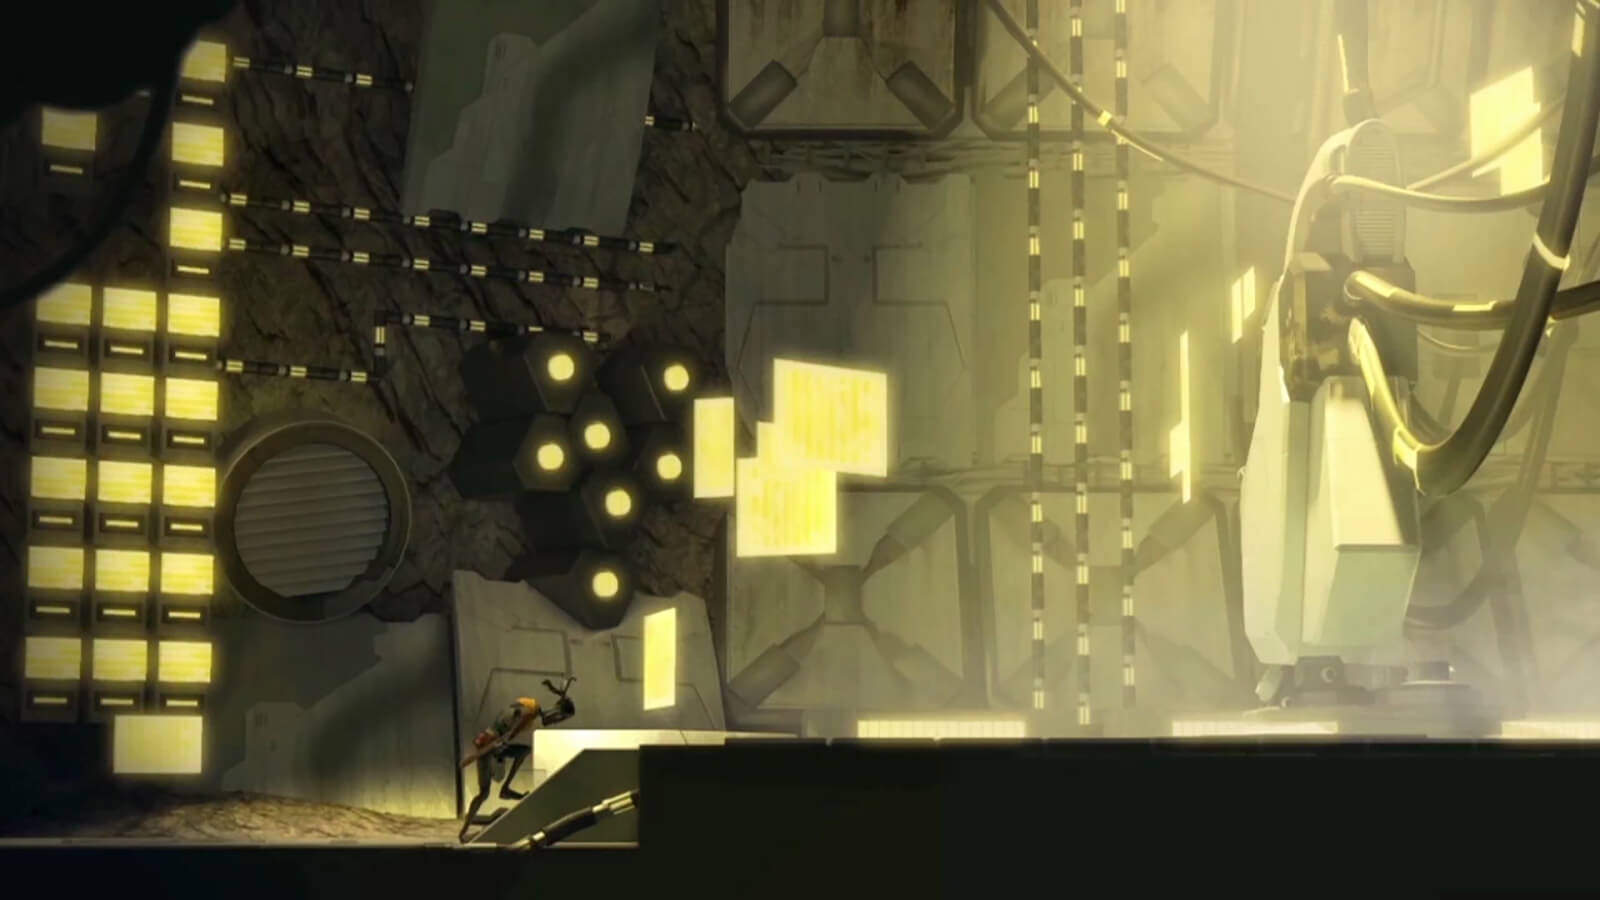 A man walks gingerly up to an altar where a large white machine stands in an expansive cavern lit by yellow lights